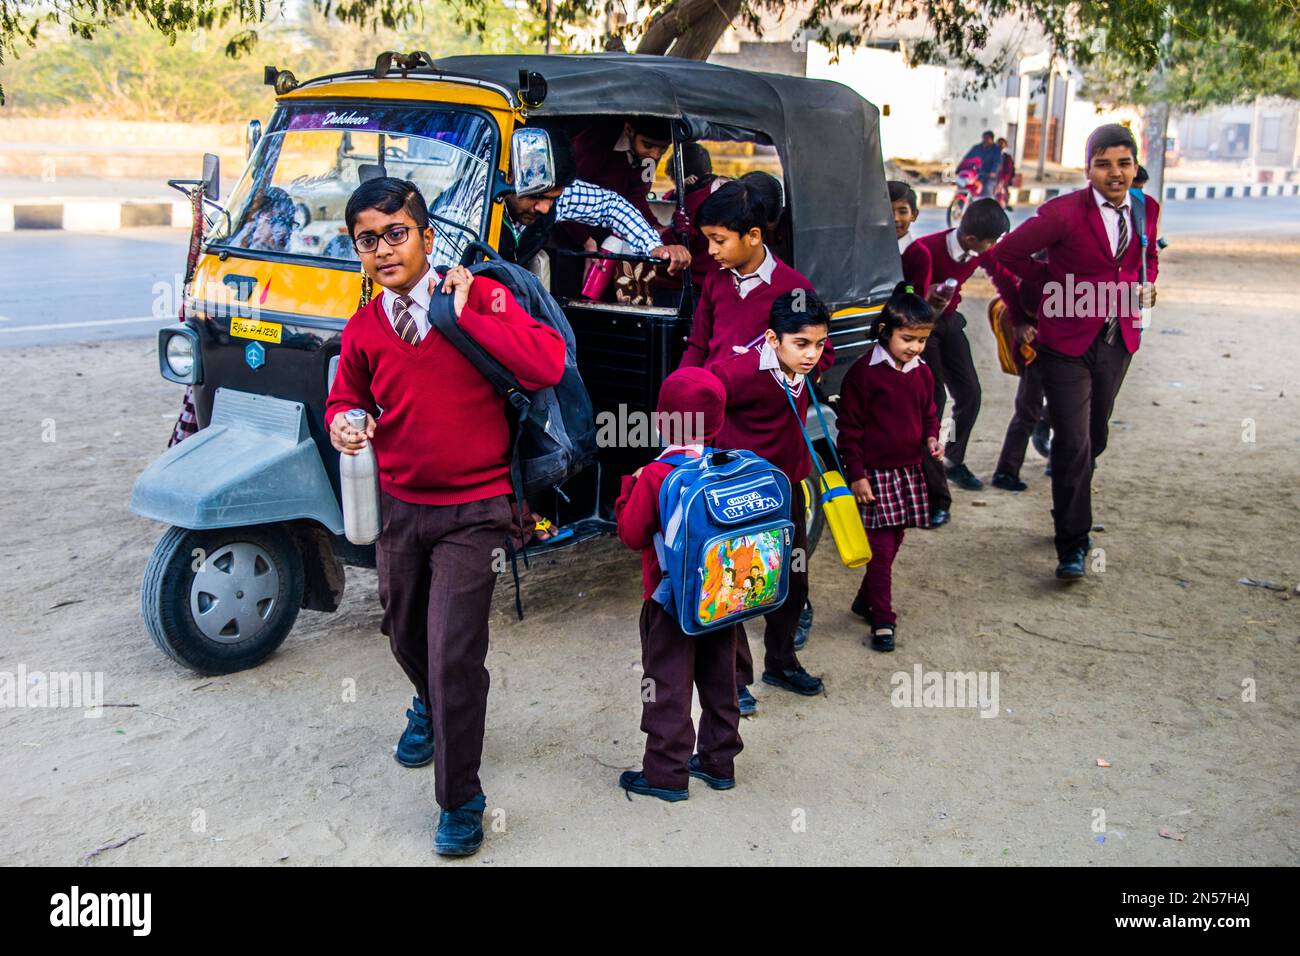 Students getting out of the tuk-tuk, St. Georges School in Rajasthan, Jaisalmer, Rajasthan, India Stock Photo